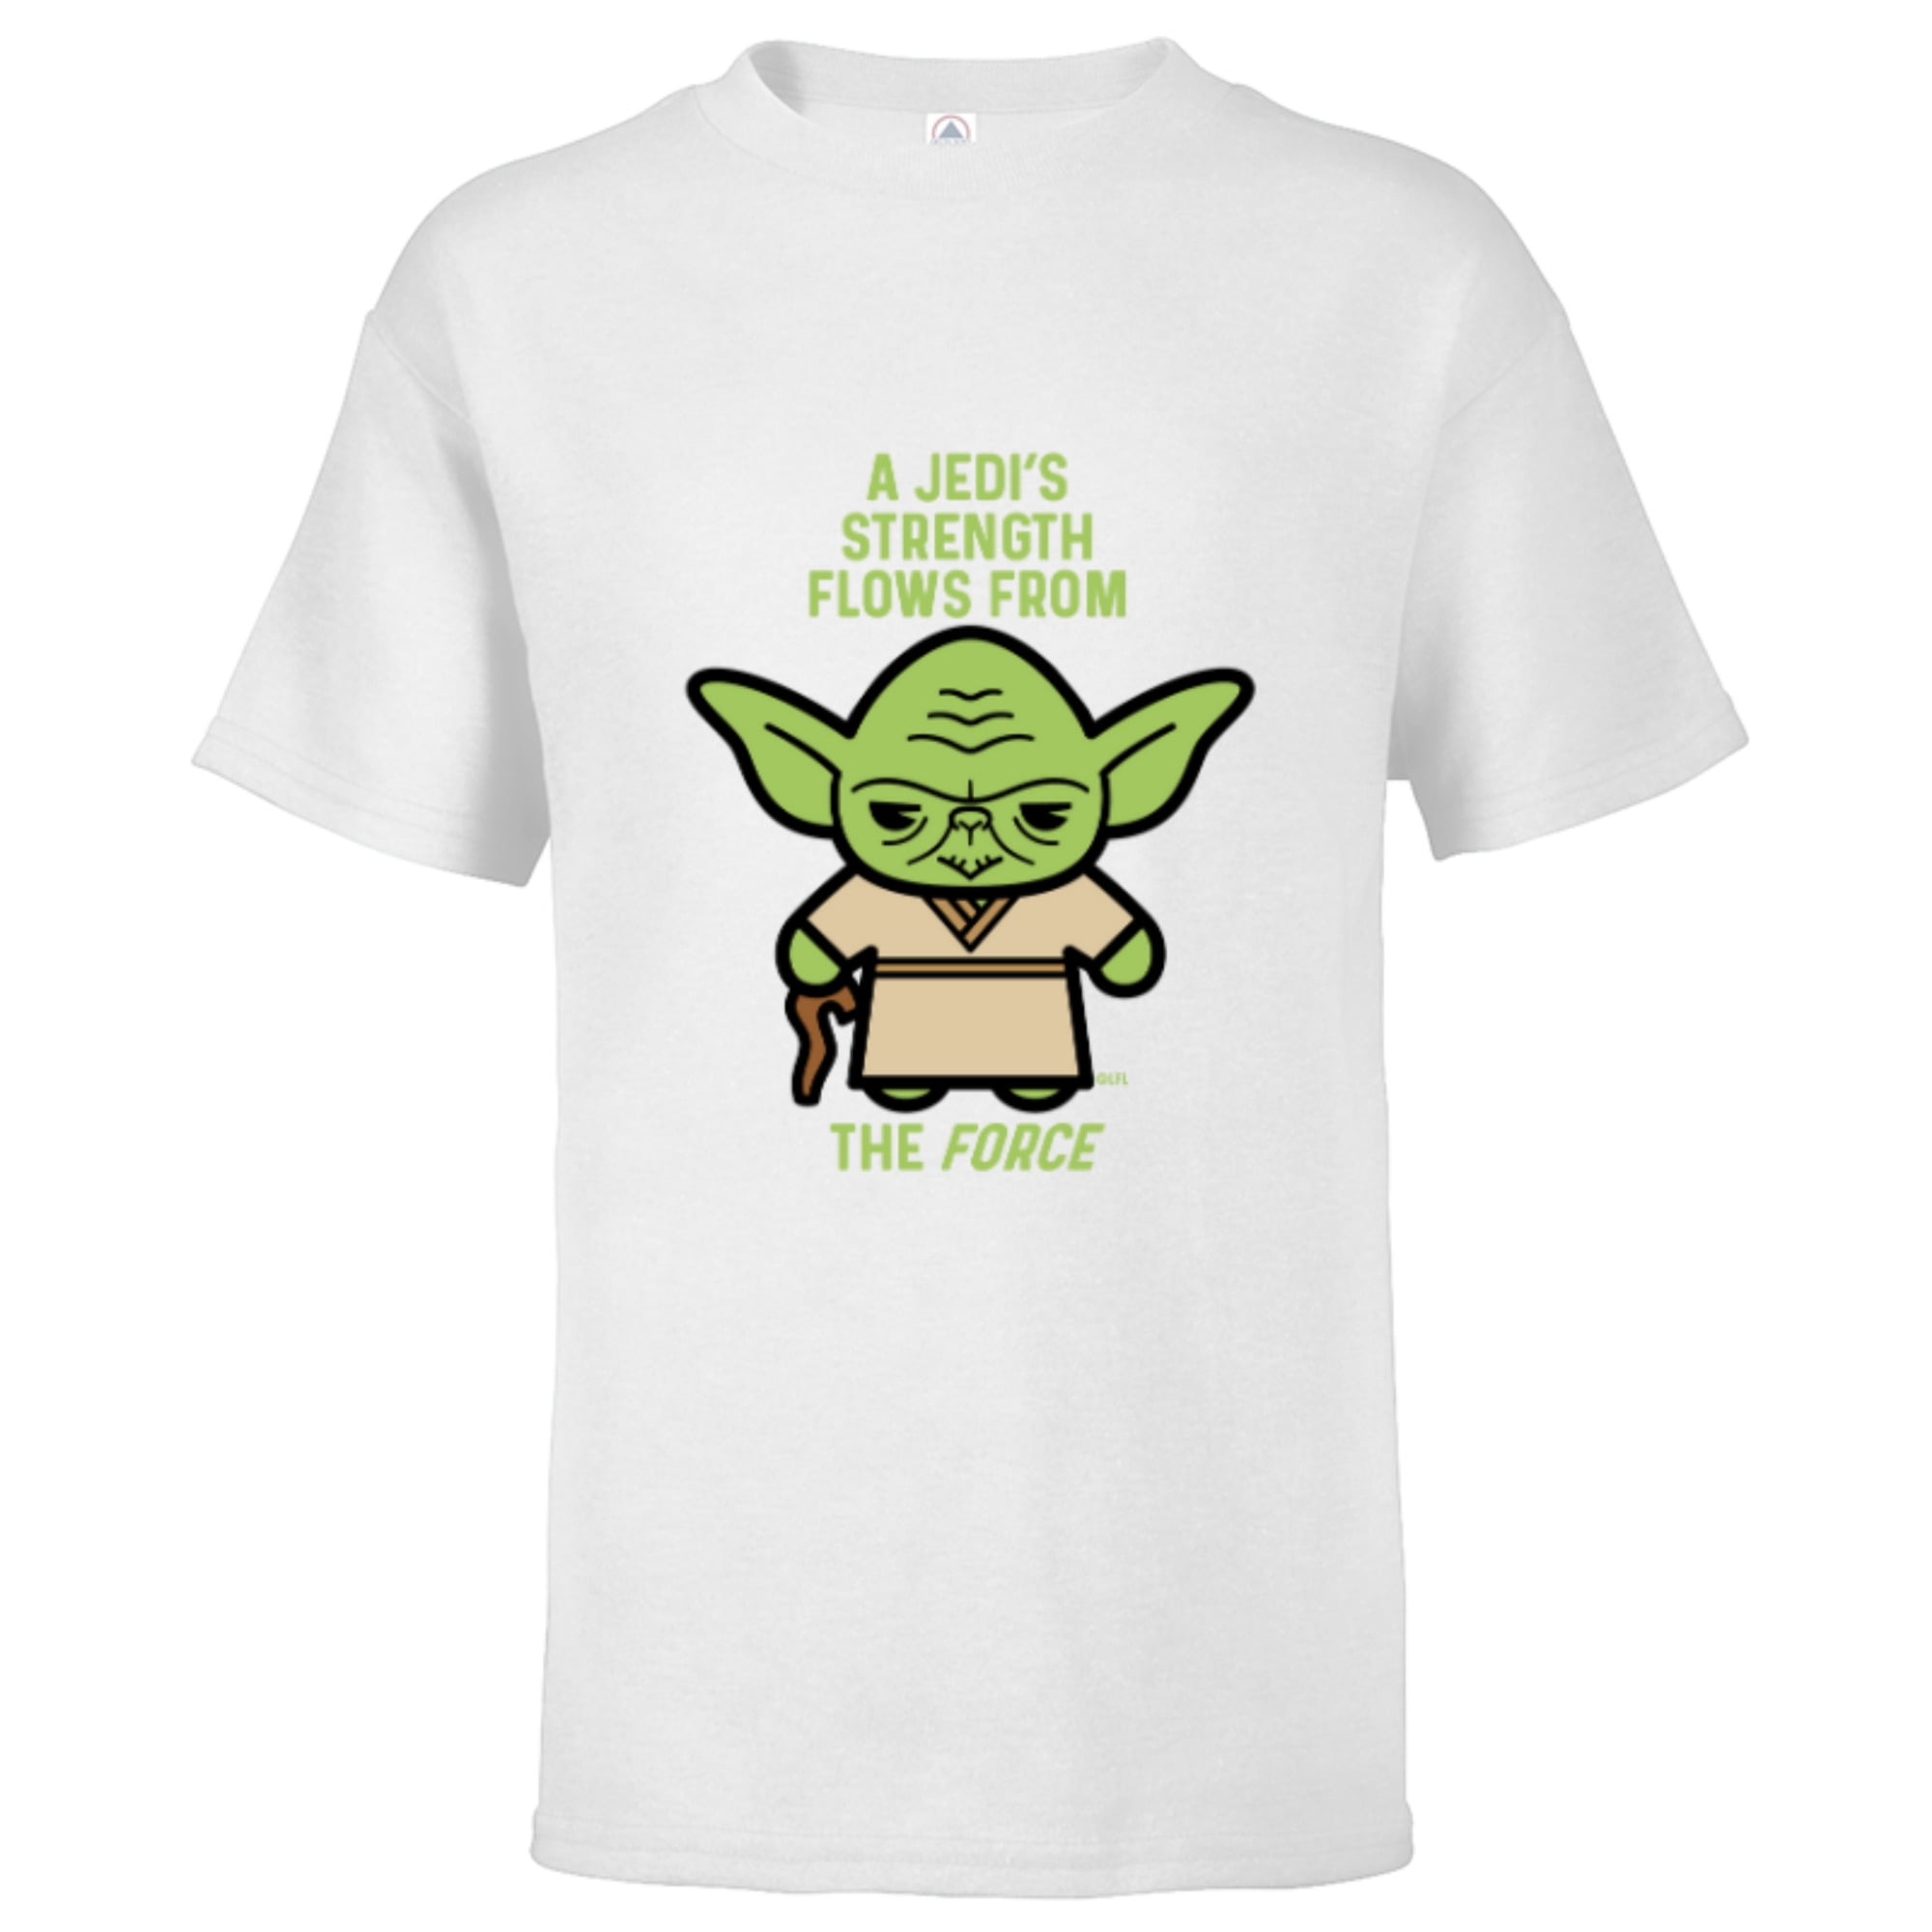 Star Wars Yoda Quote A Jedi\'s Strength Flows from the Force - Short Sleeve T -Shirt for Kids - Customized-White